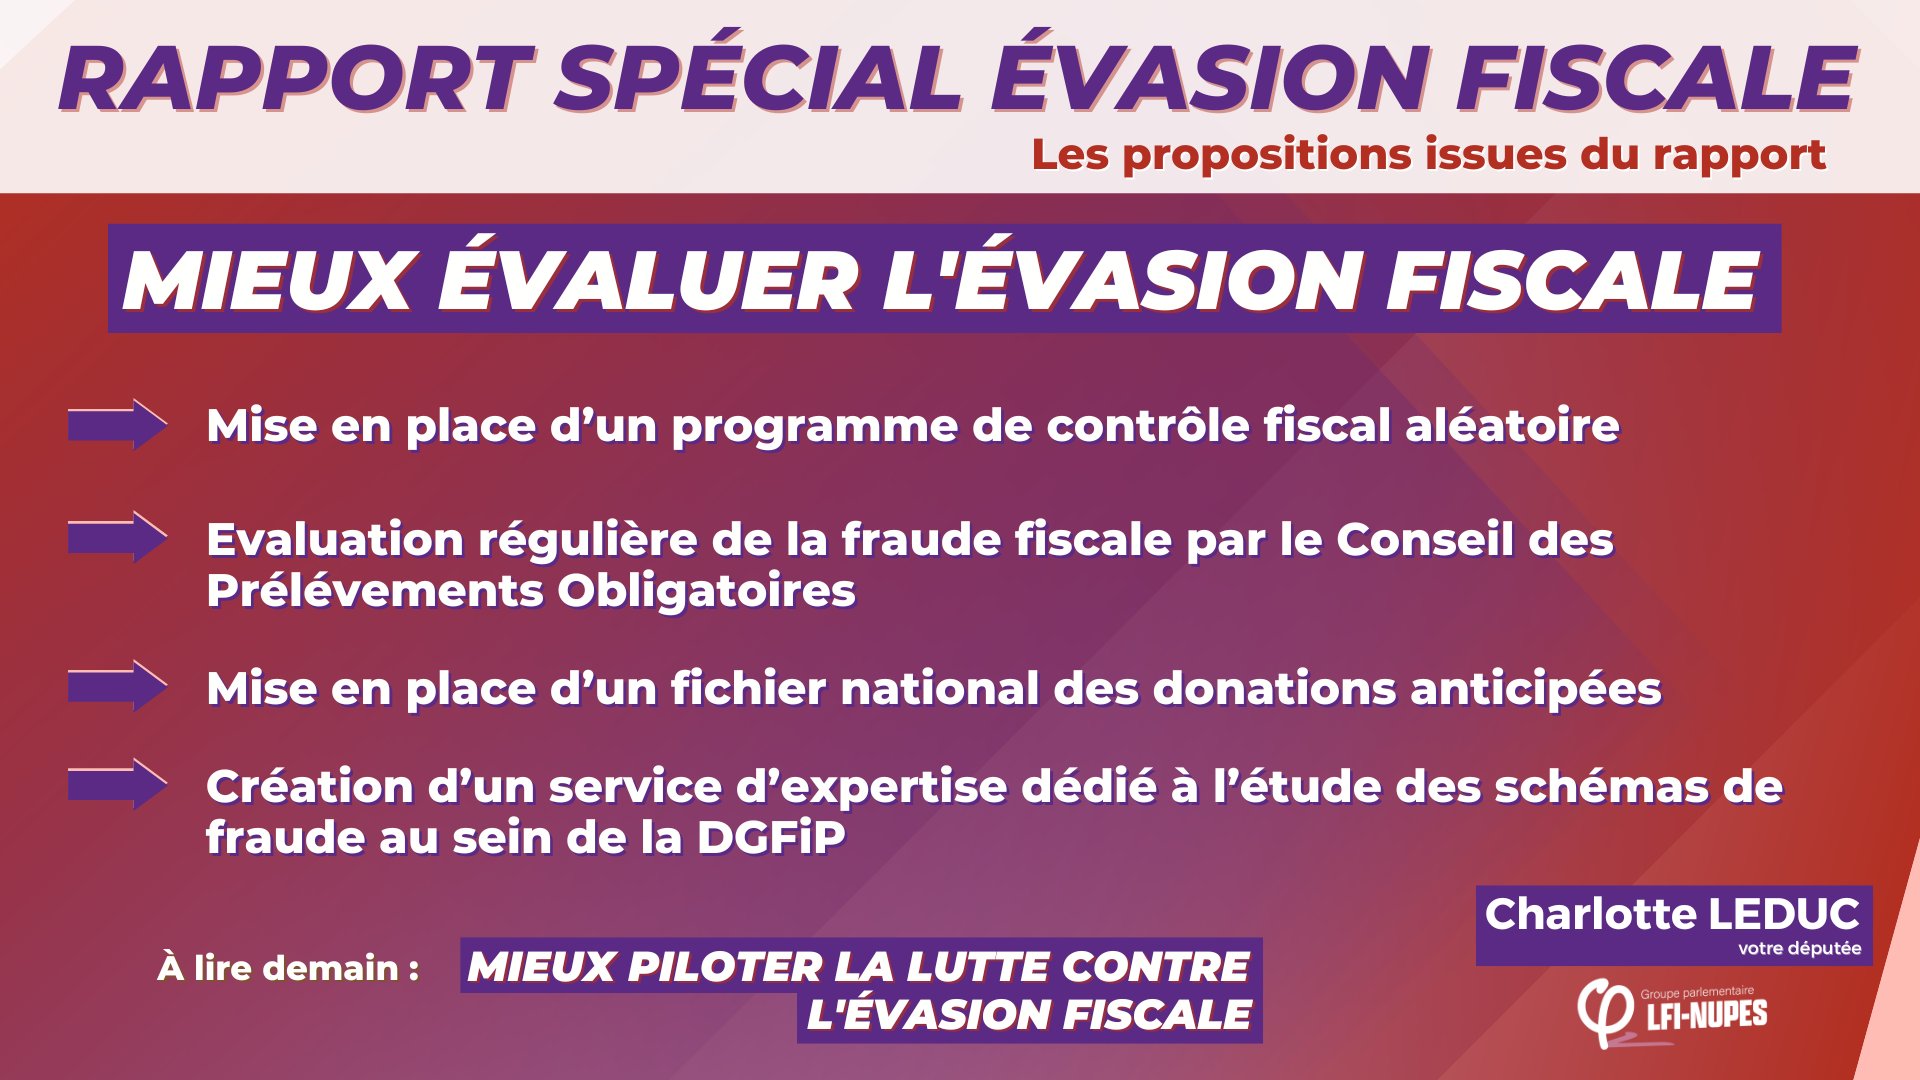 rs evasion fiscale 1